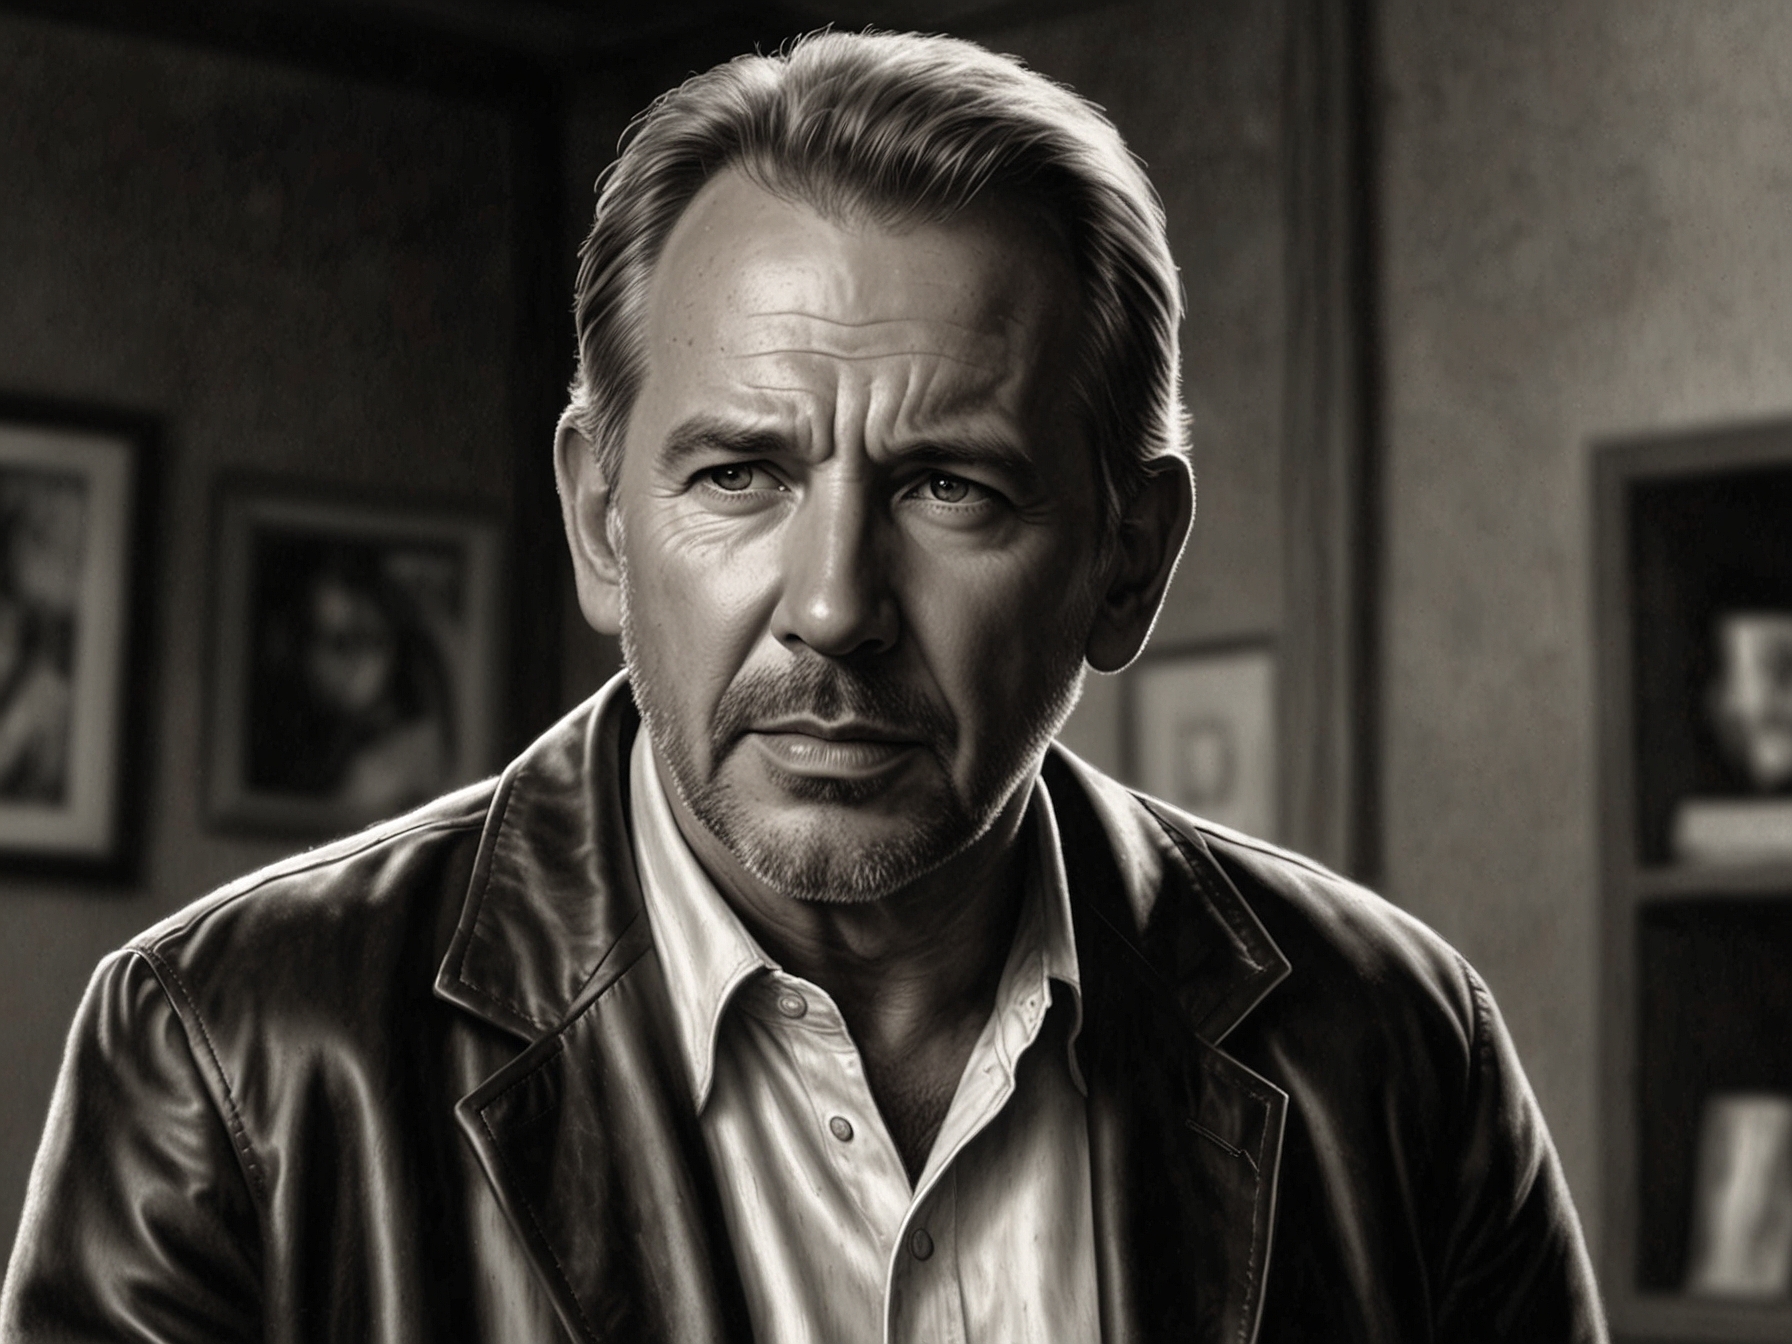 Kevin Costner as Denny Davies in 'The Upside of Anger', a dramedy where he plays a former baseball player turned radio host, showcasing his ability to balance humor and drama.